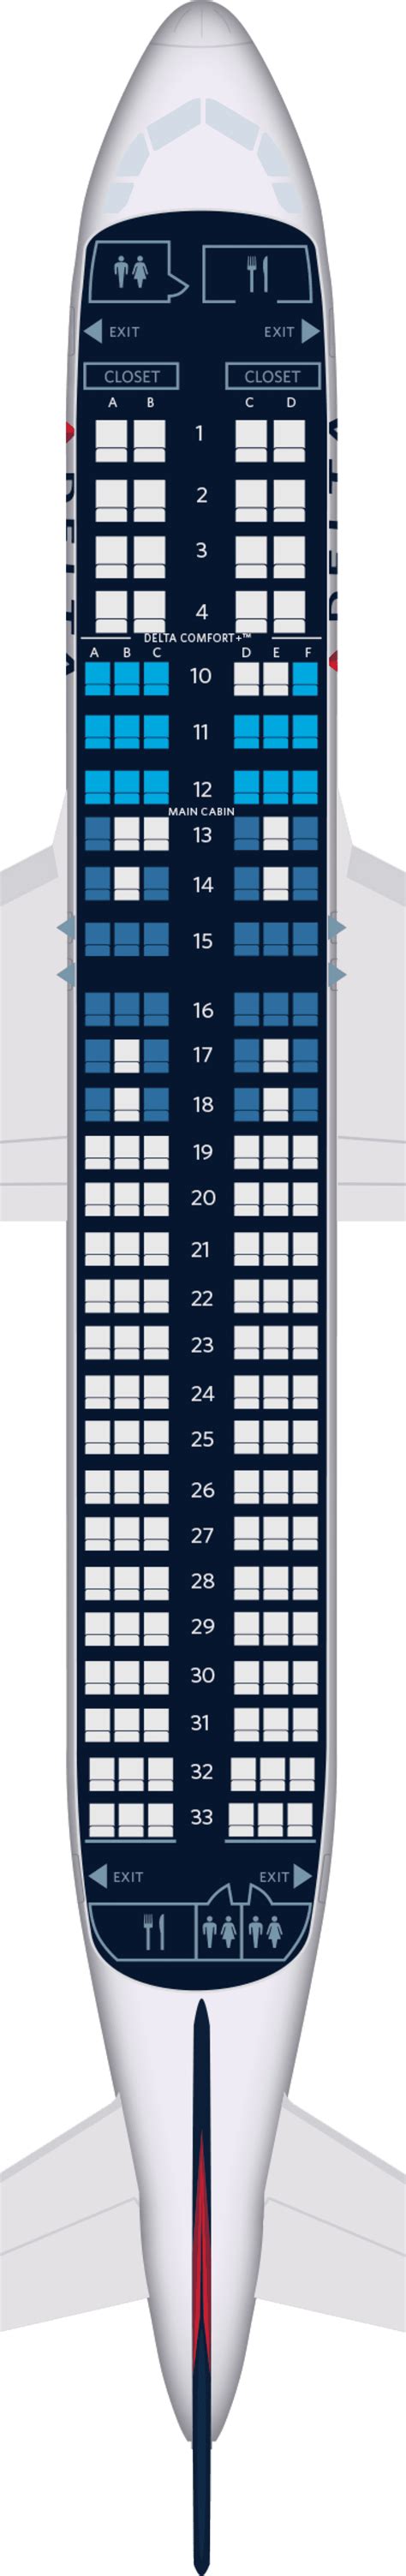 Airbus a320 aircraft seating. Things To Know About Airbus a320 aircraft seating. 